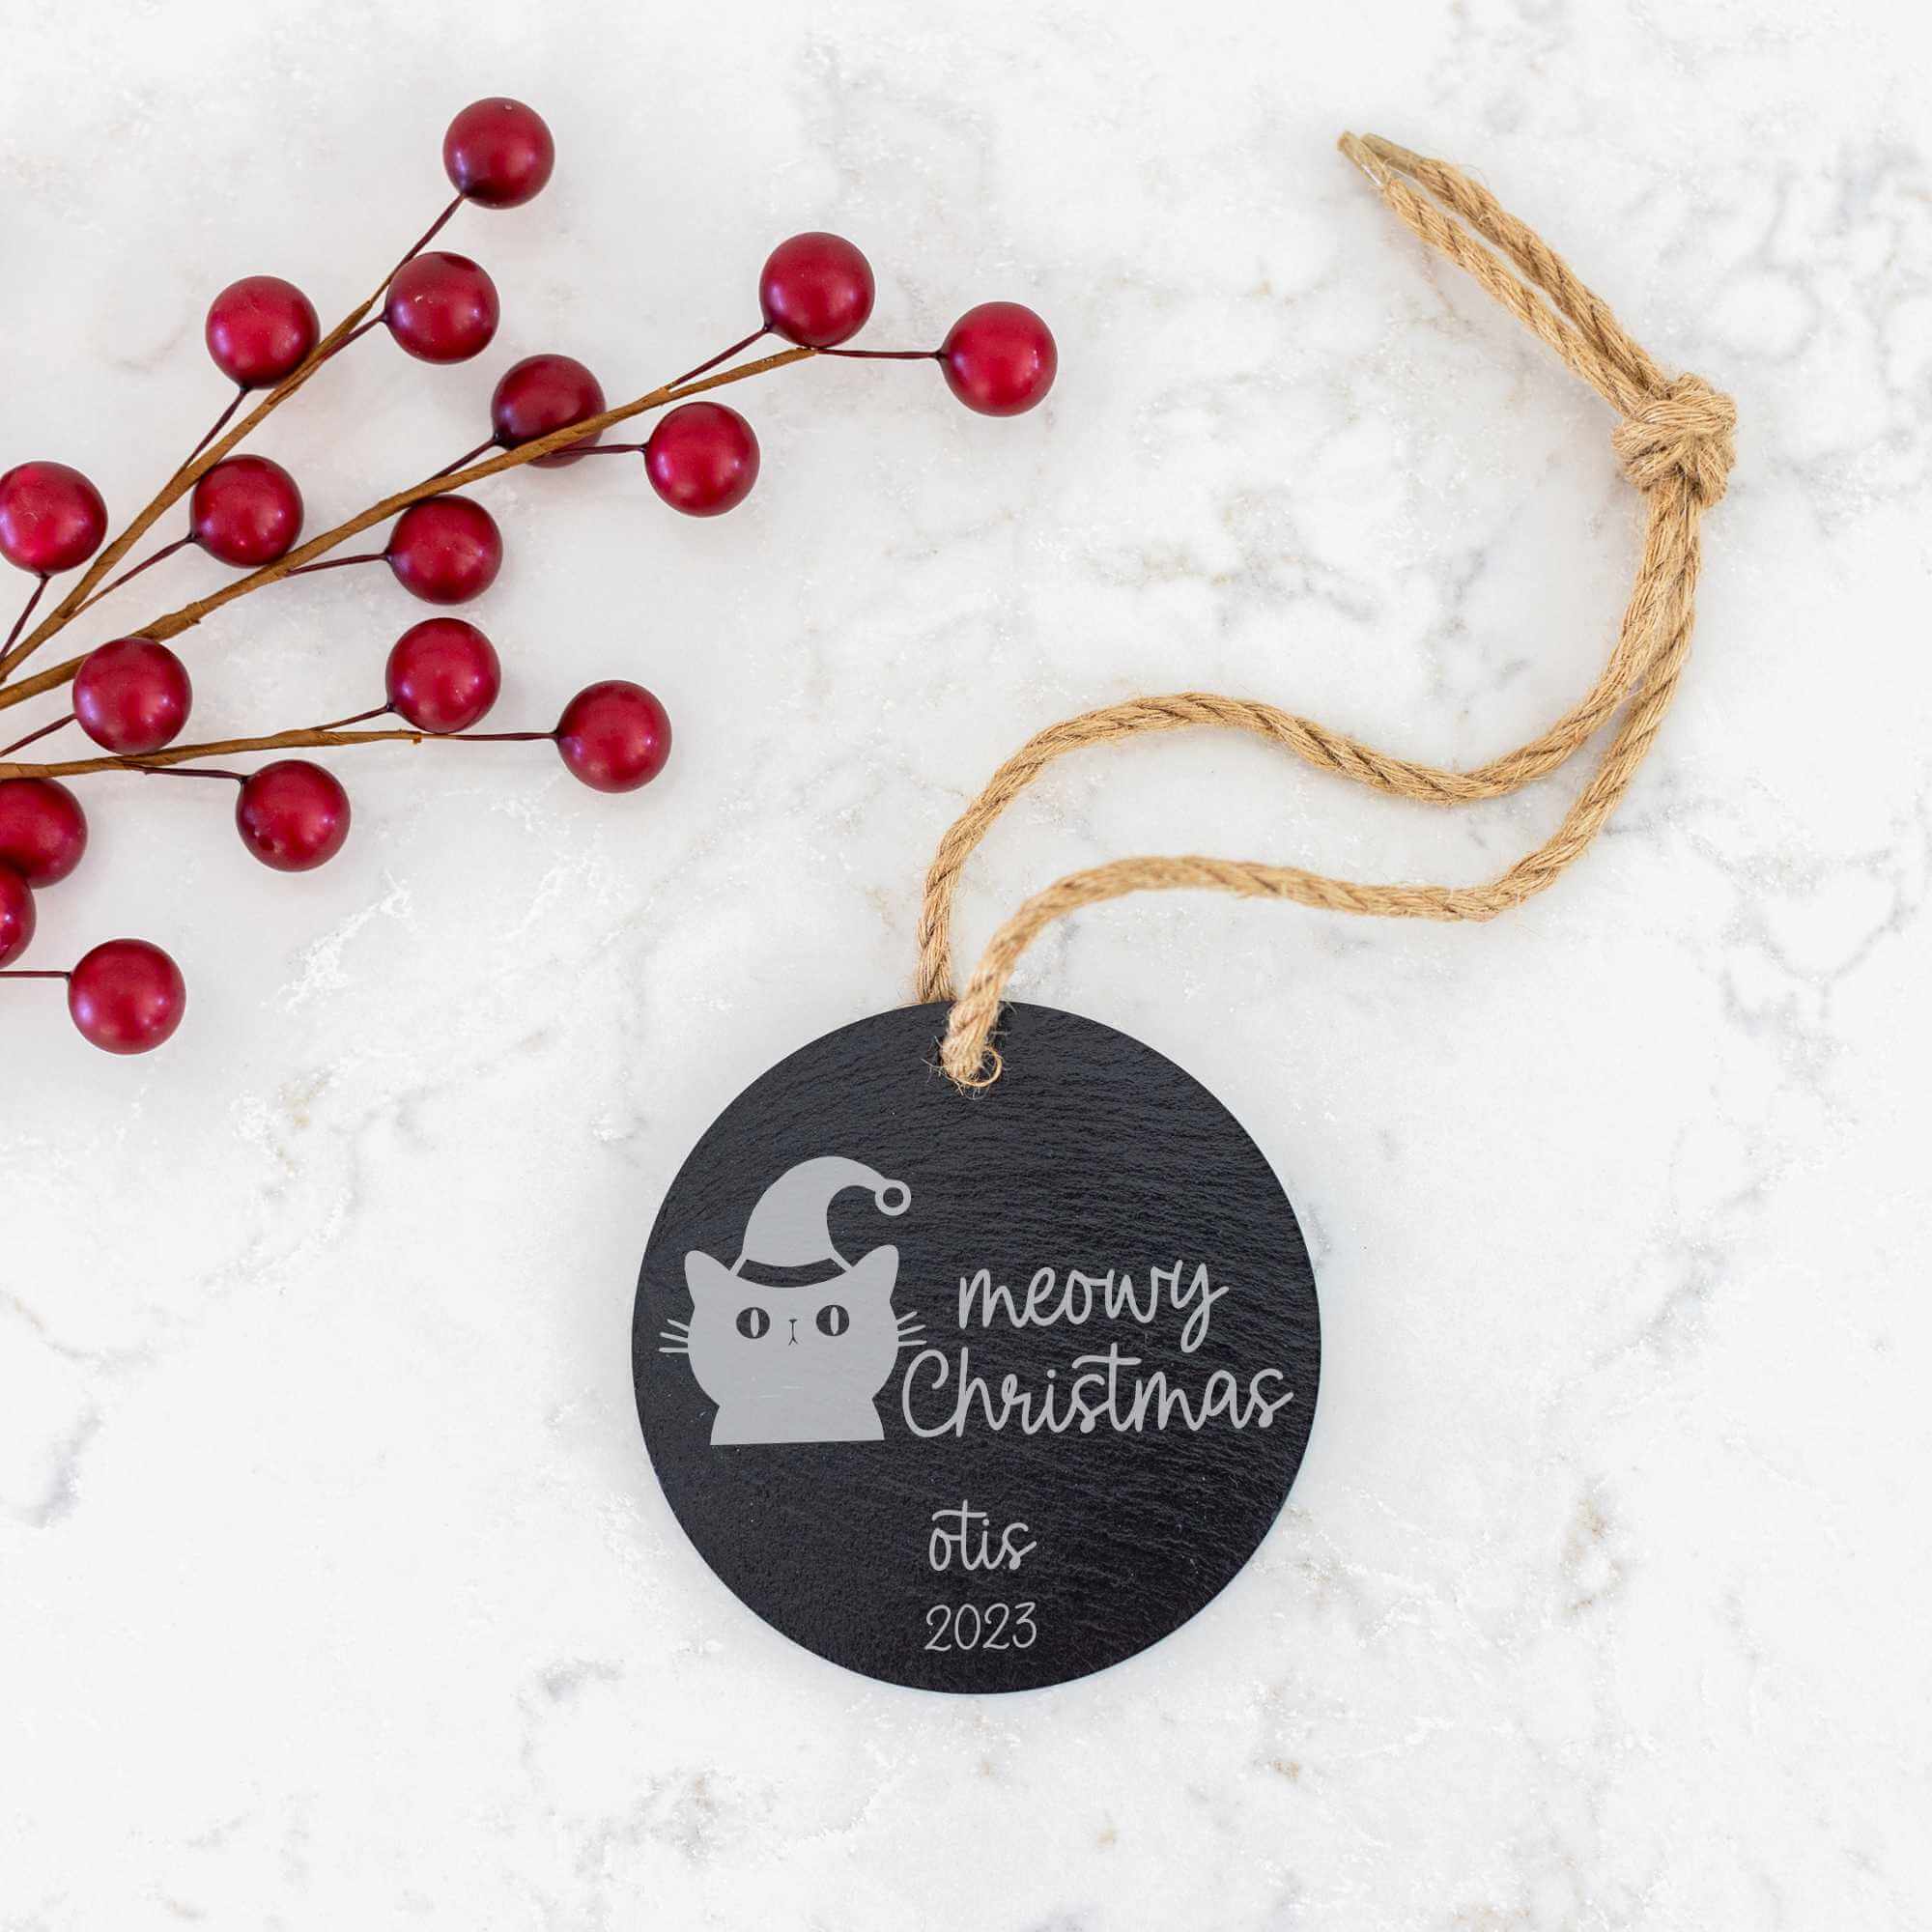 Meowy Christmas - Tree Ornament with Cat's Name & Year